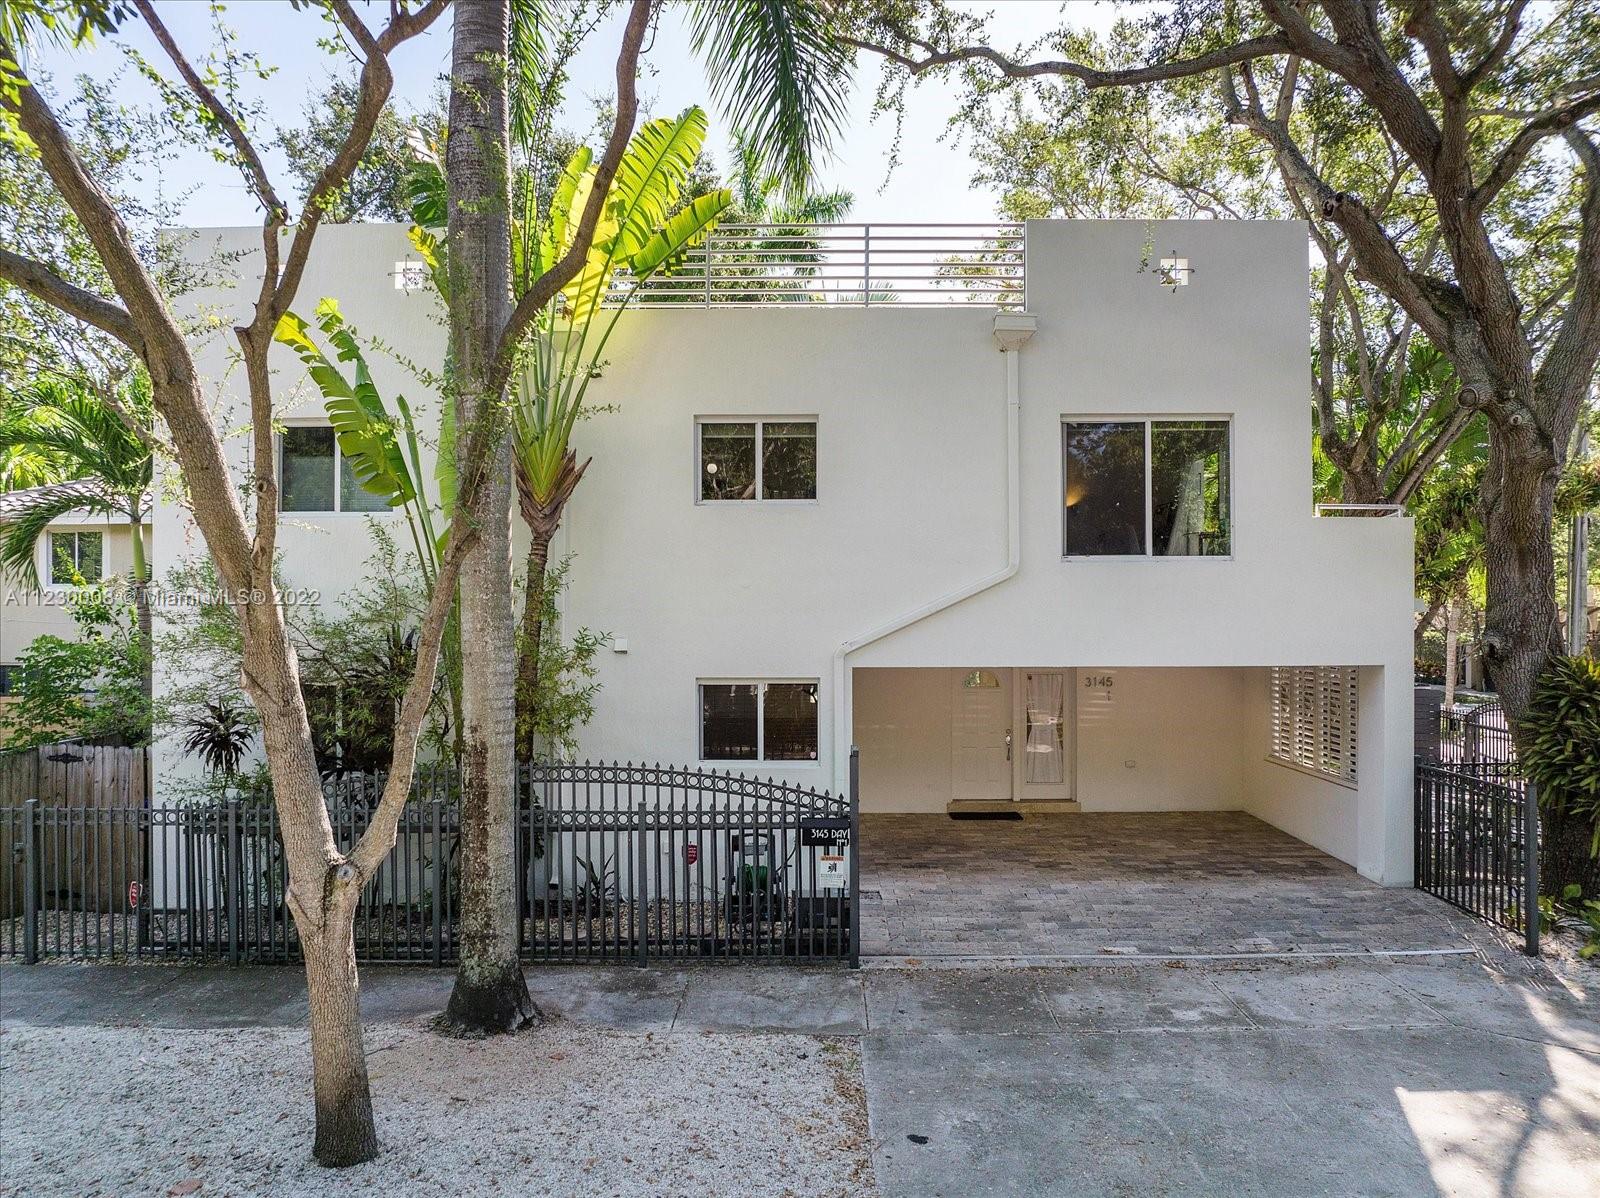 BEAUTIFUL FIRST FLOOR UNIT IN DESIRABLE COCONUT GROVE!  UNIT HAS GRANITE COUNTERS, STAINLESS STEEL KITCHEN APPLIANCES, MARBLE FLOORING AND MORE!  GATED PROPERTY WITH CARPORT FOR TWO CARS.  WALKING DISTANCE TO GROVE TENNIS COURTS, RESTAURANTS, STORES AND THEATERS.